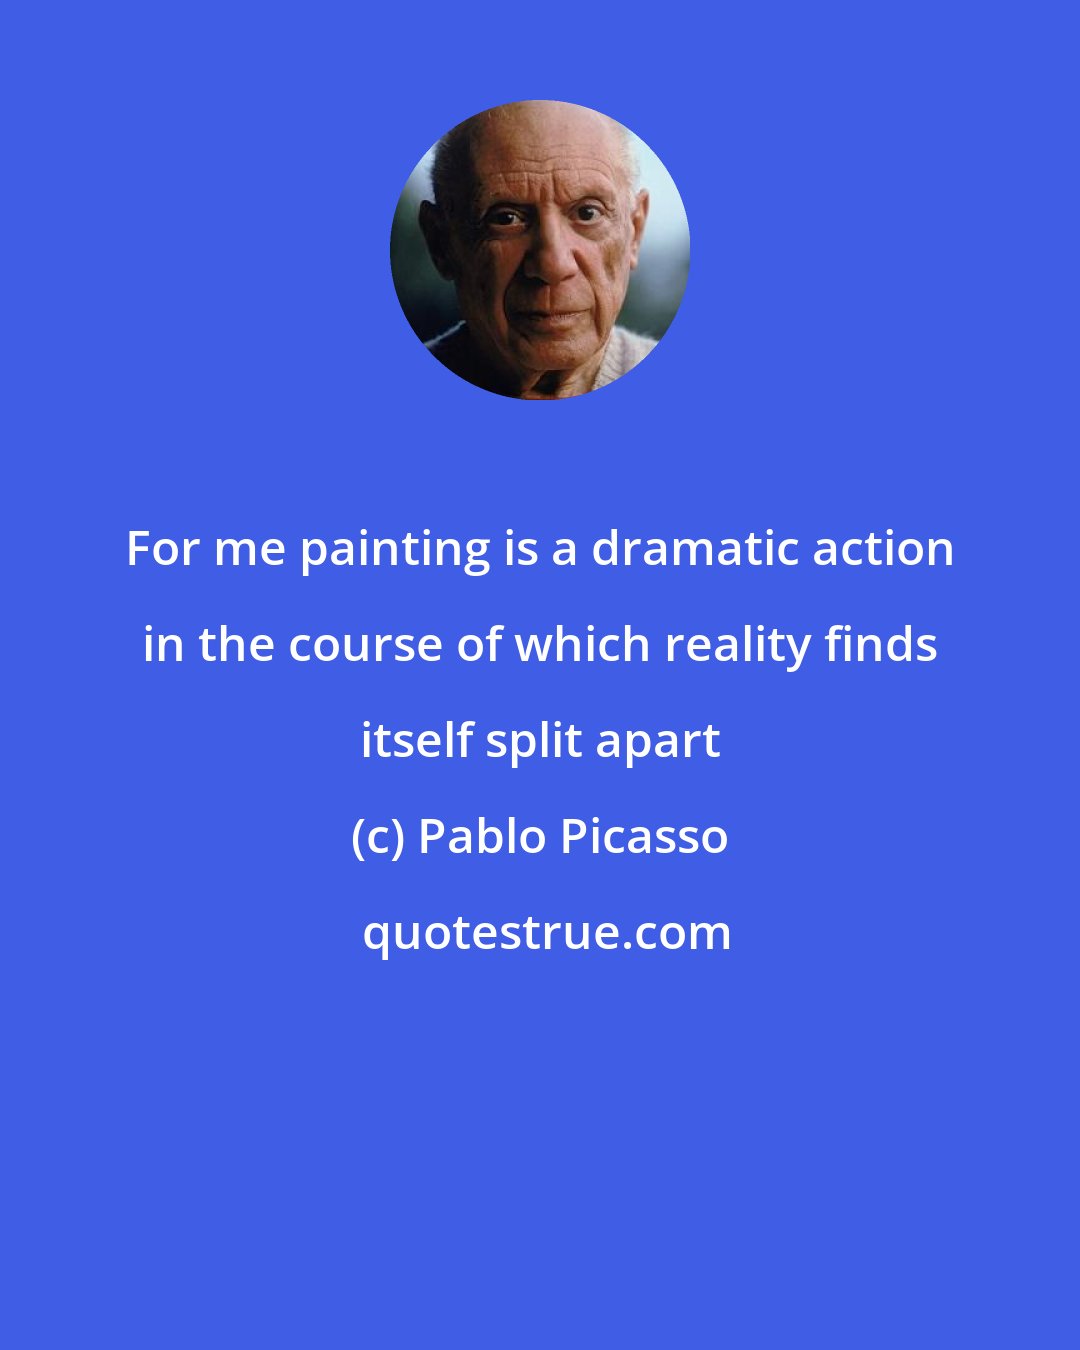 Pablo Picasso: For me painting is a dramatic action in the course of which reality finds itself split apart